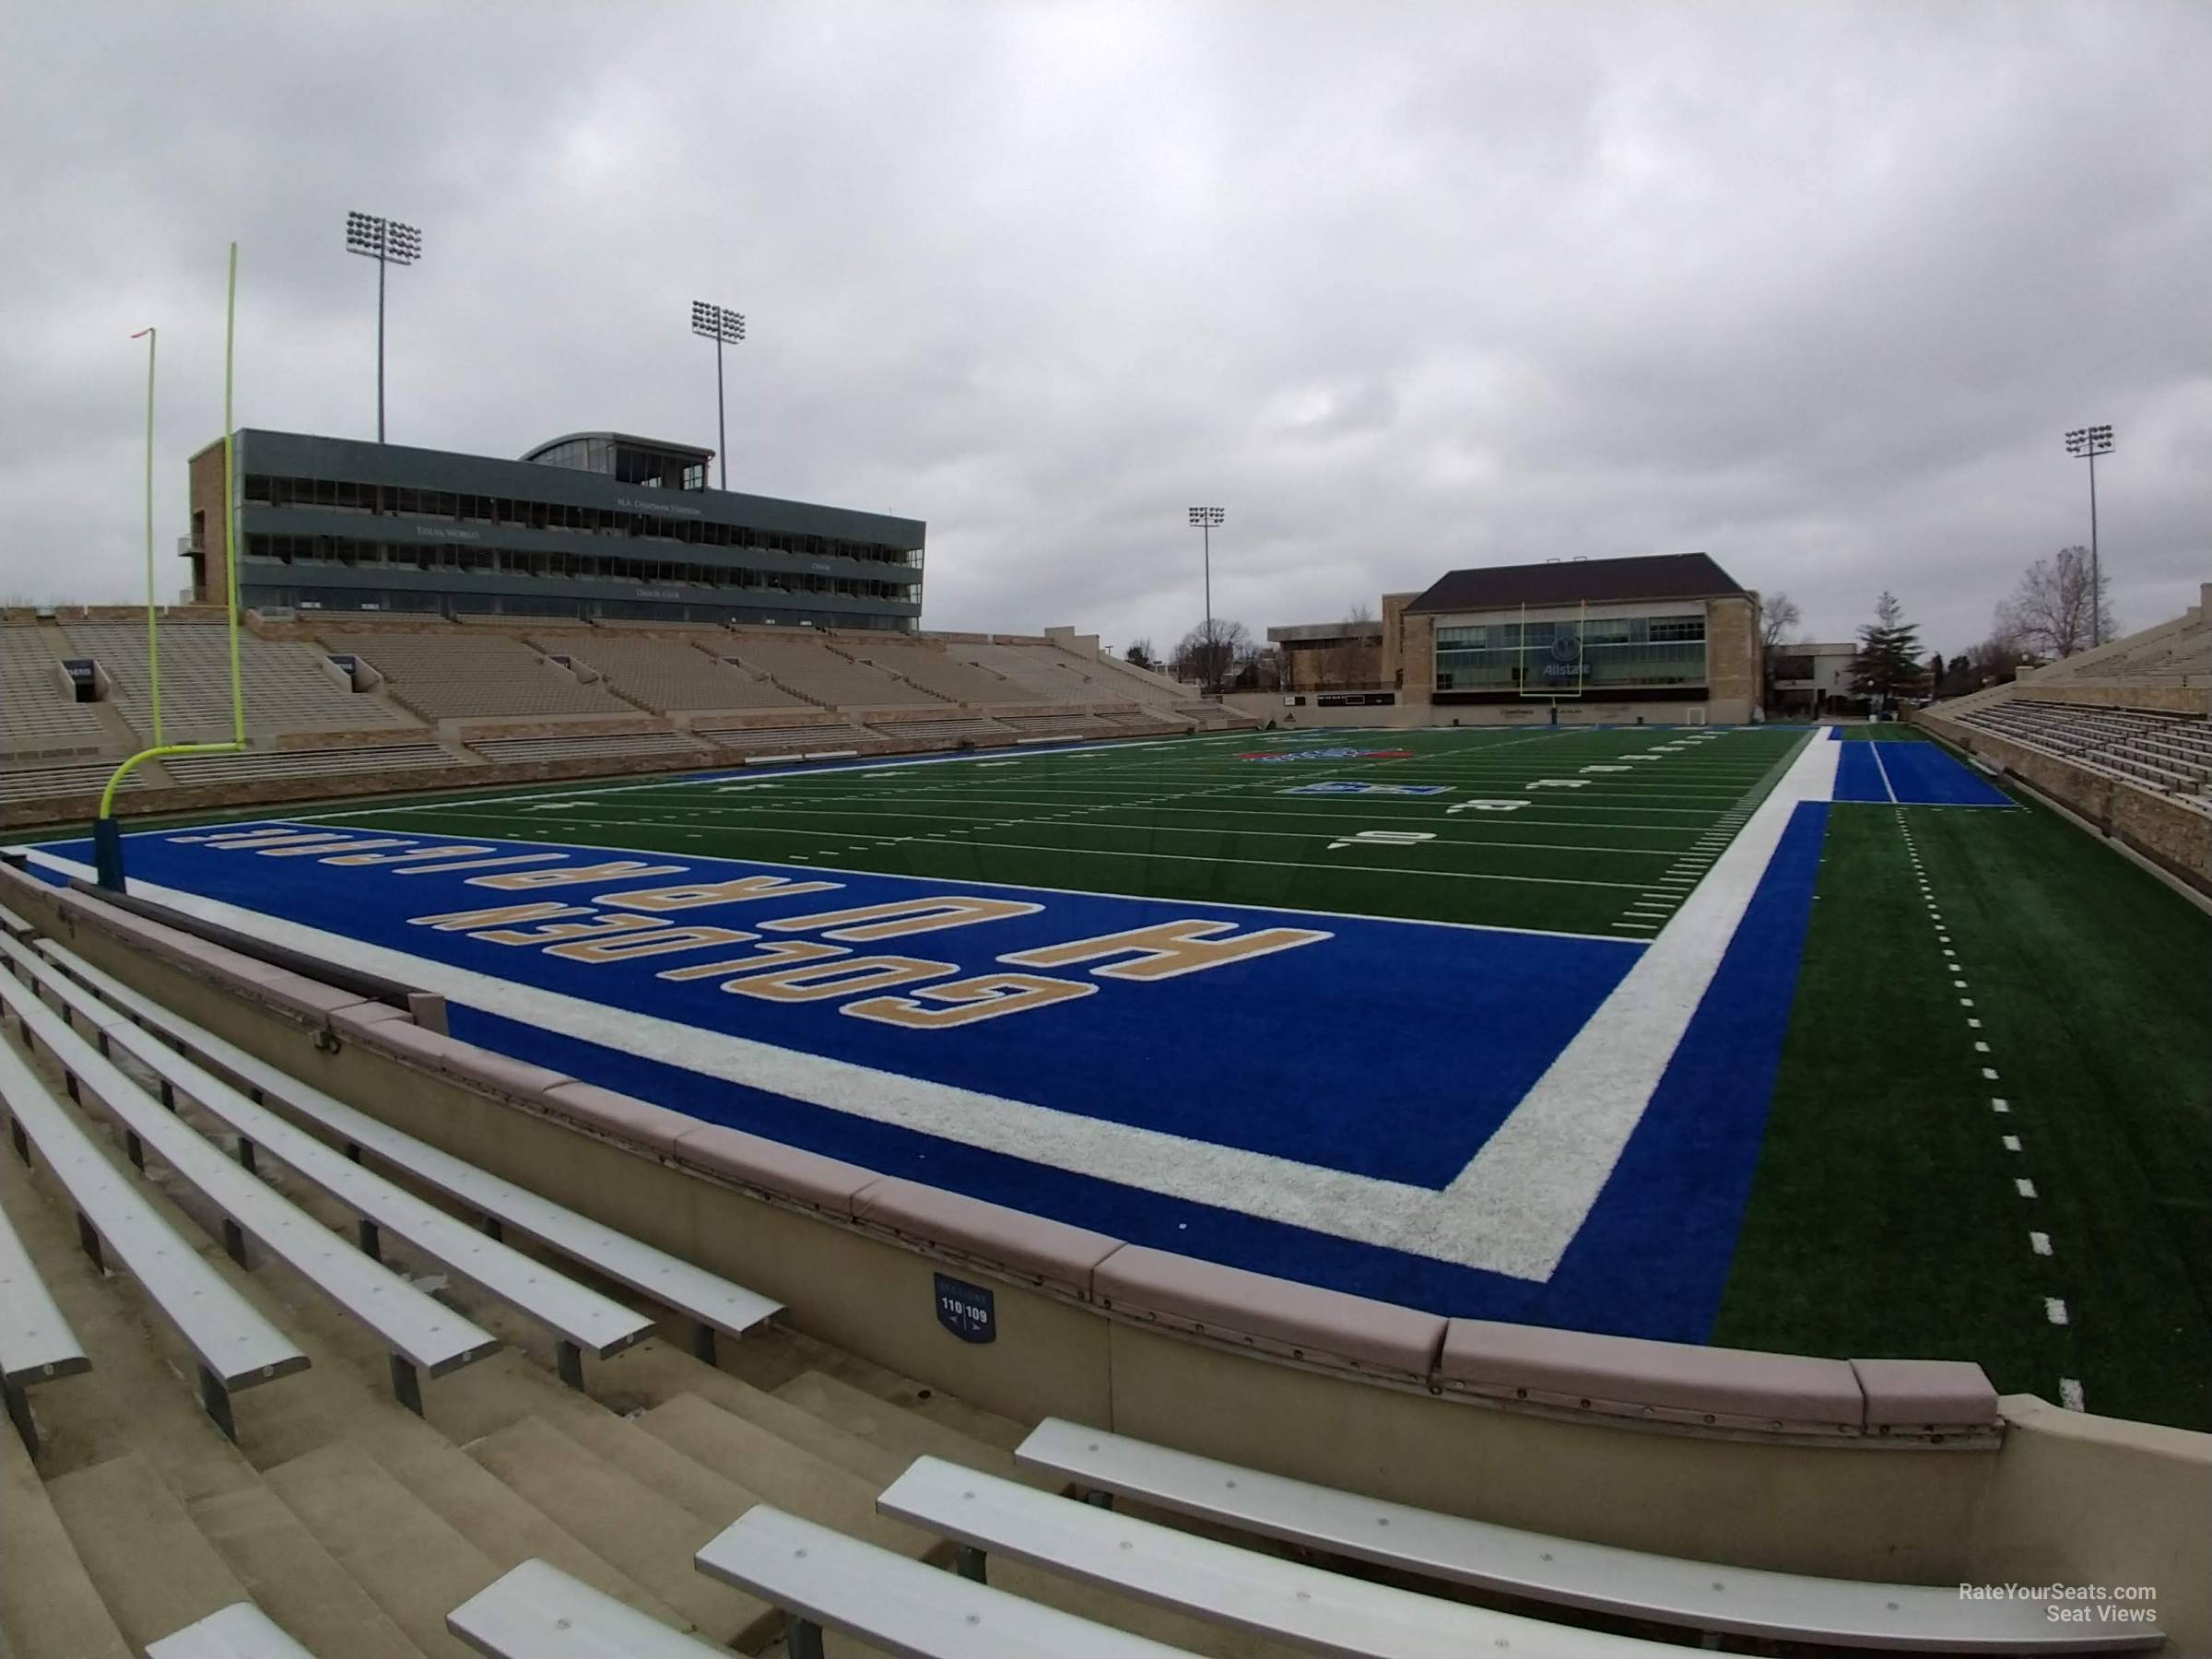 section 109, row 5 seat view  - h.a. chapman stadium